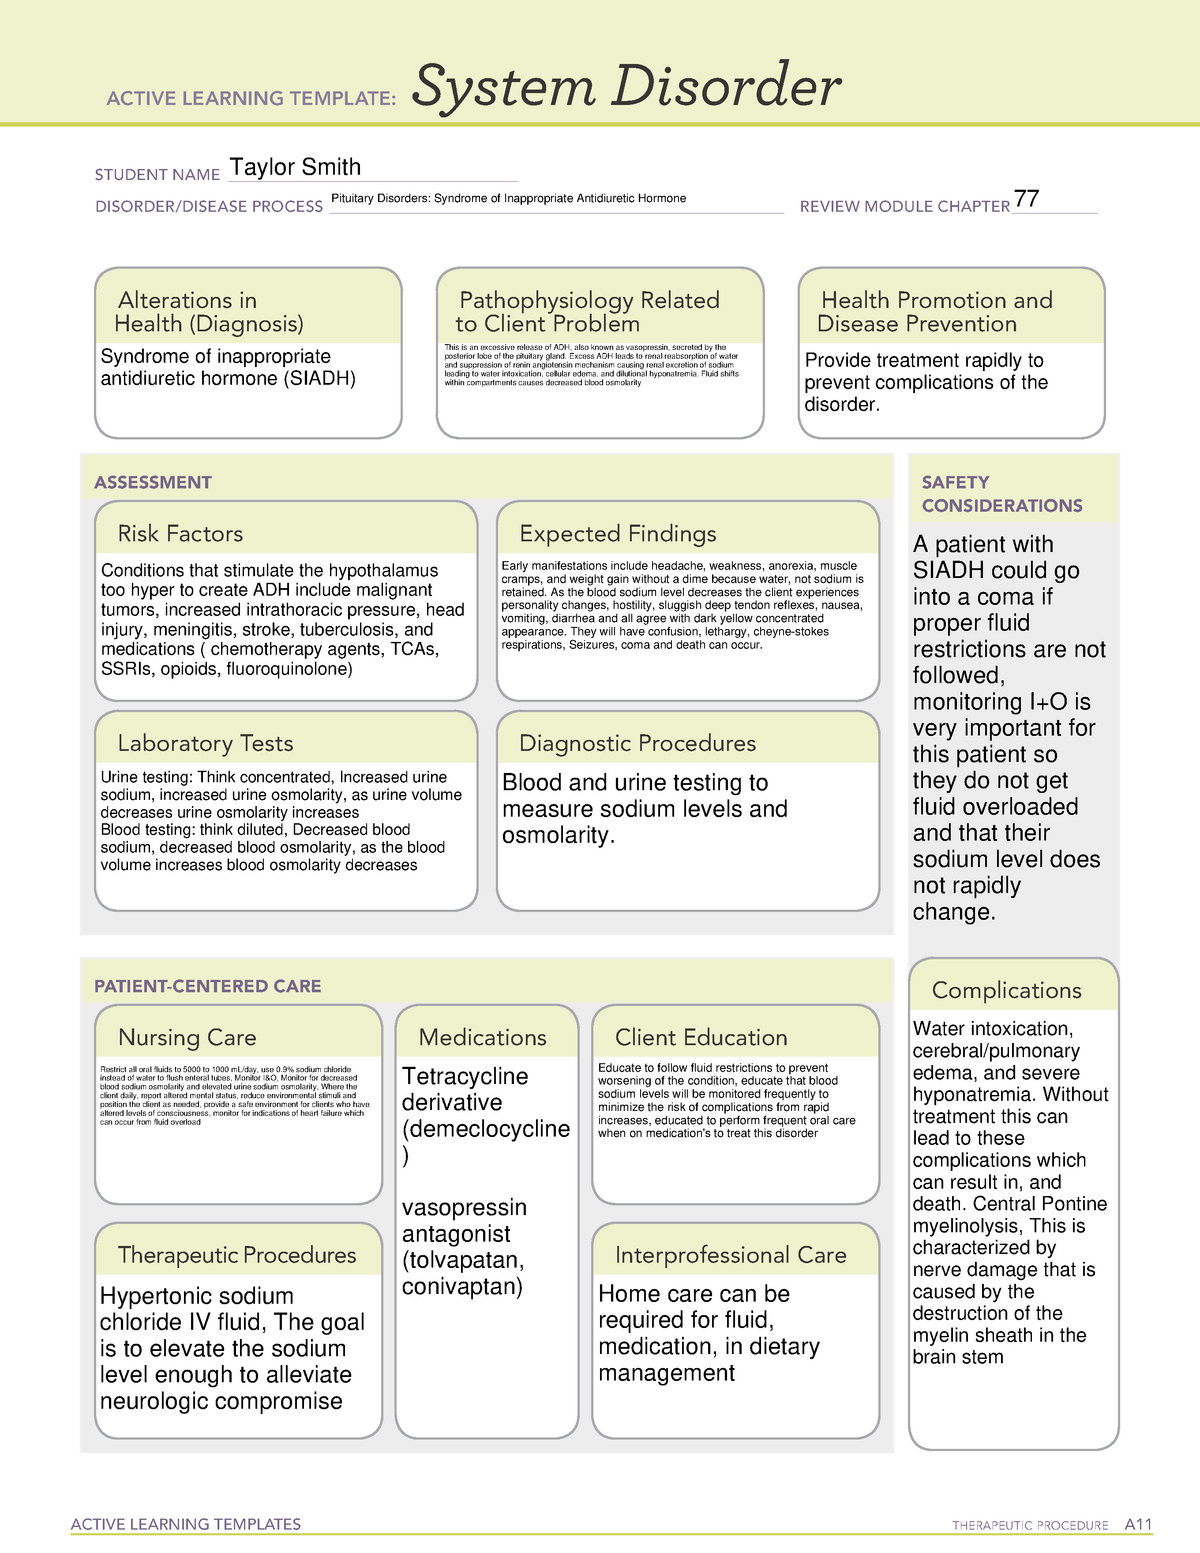 ati-system-disorder-endocrine-template-active-learning-templates